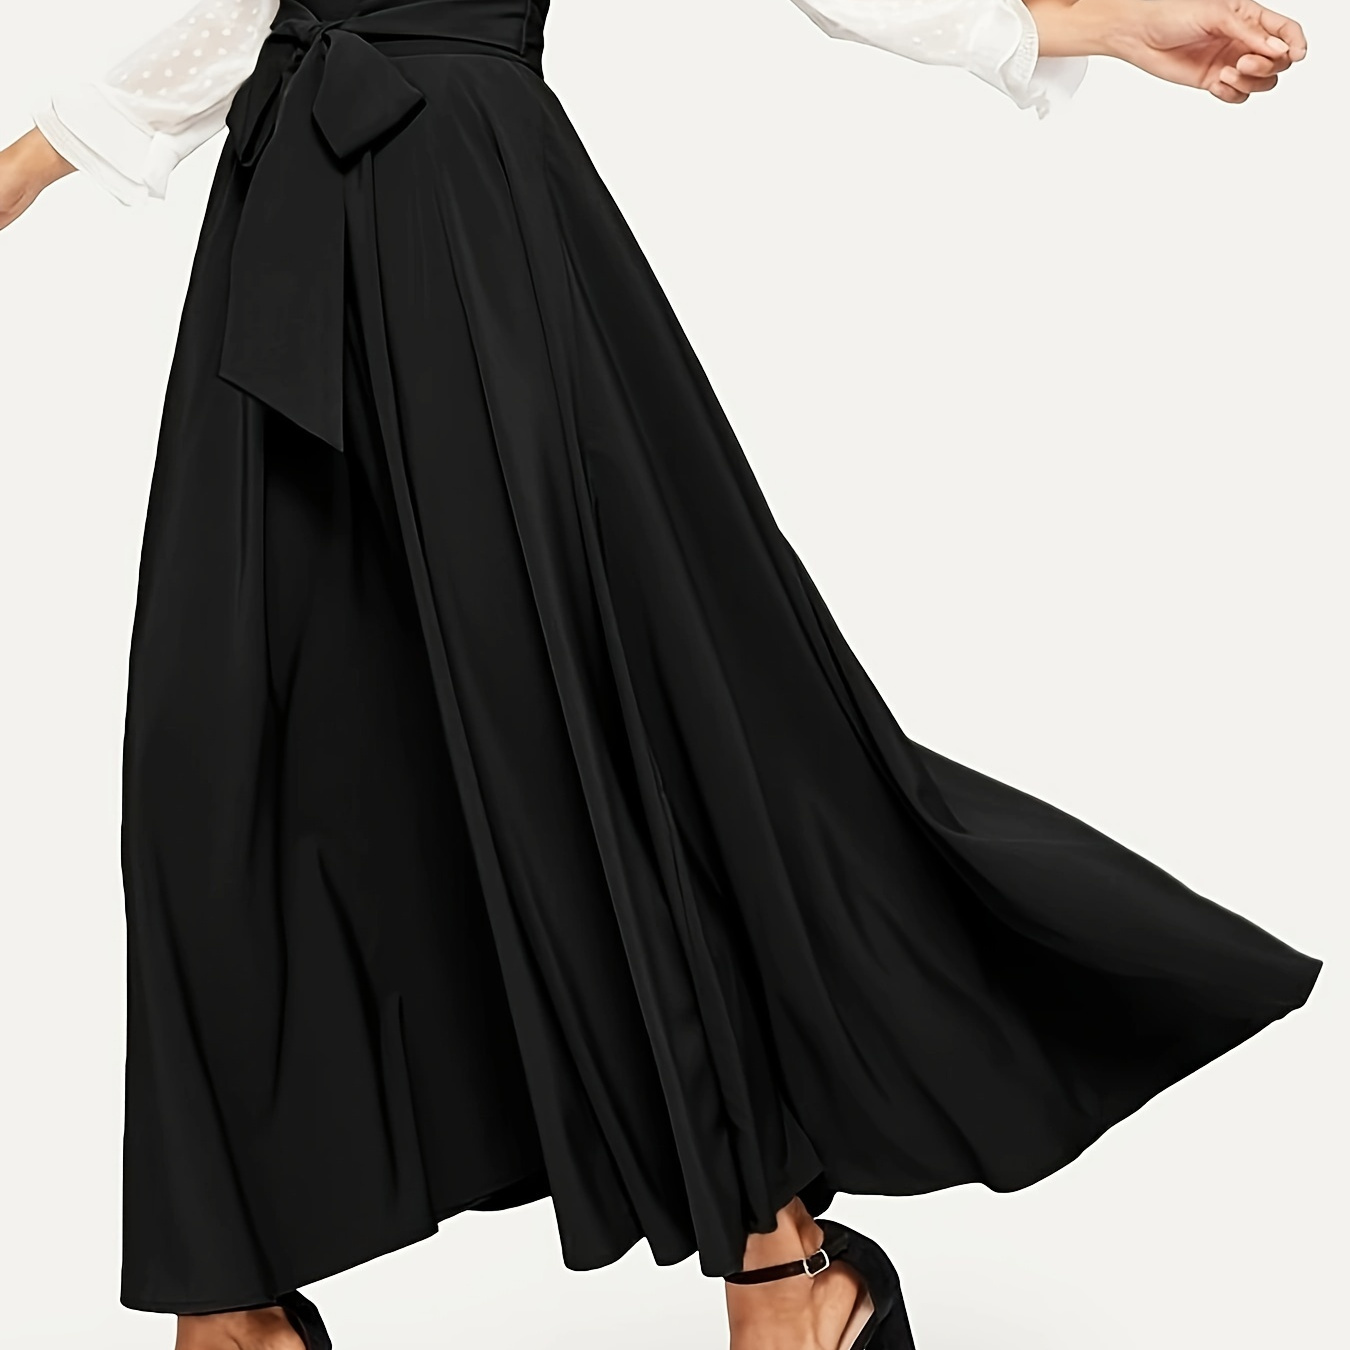 

Solid Lace Up High Waist Skirt, Elegant Big Swing Flared Maxi Skirt, Women's Clothing